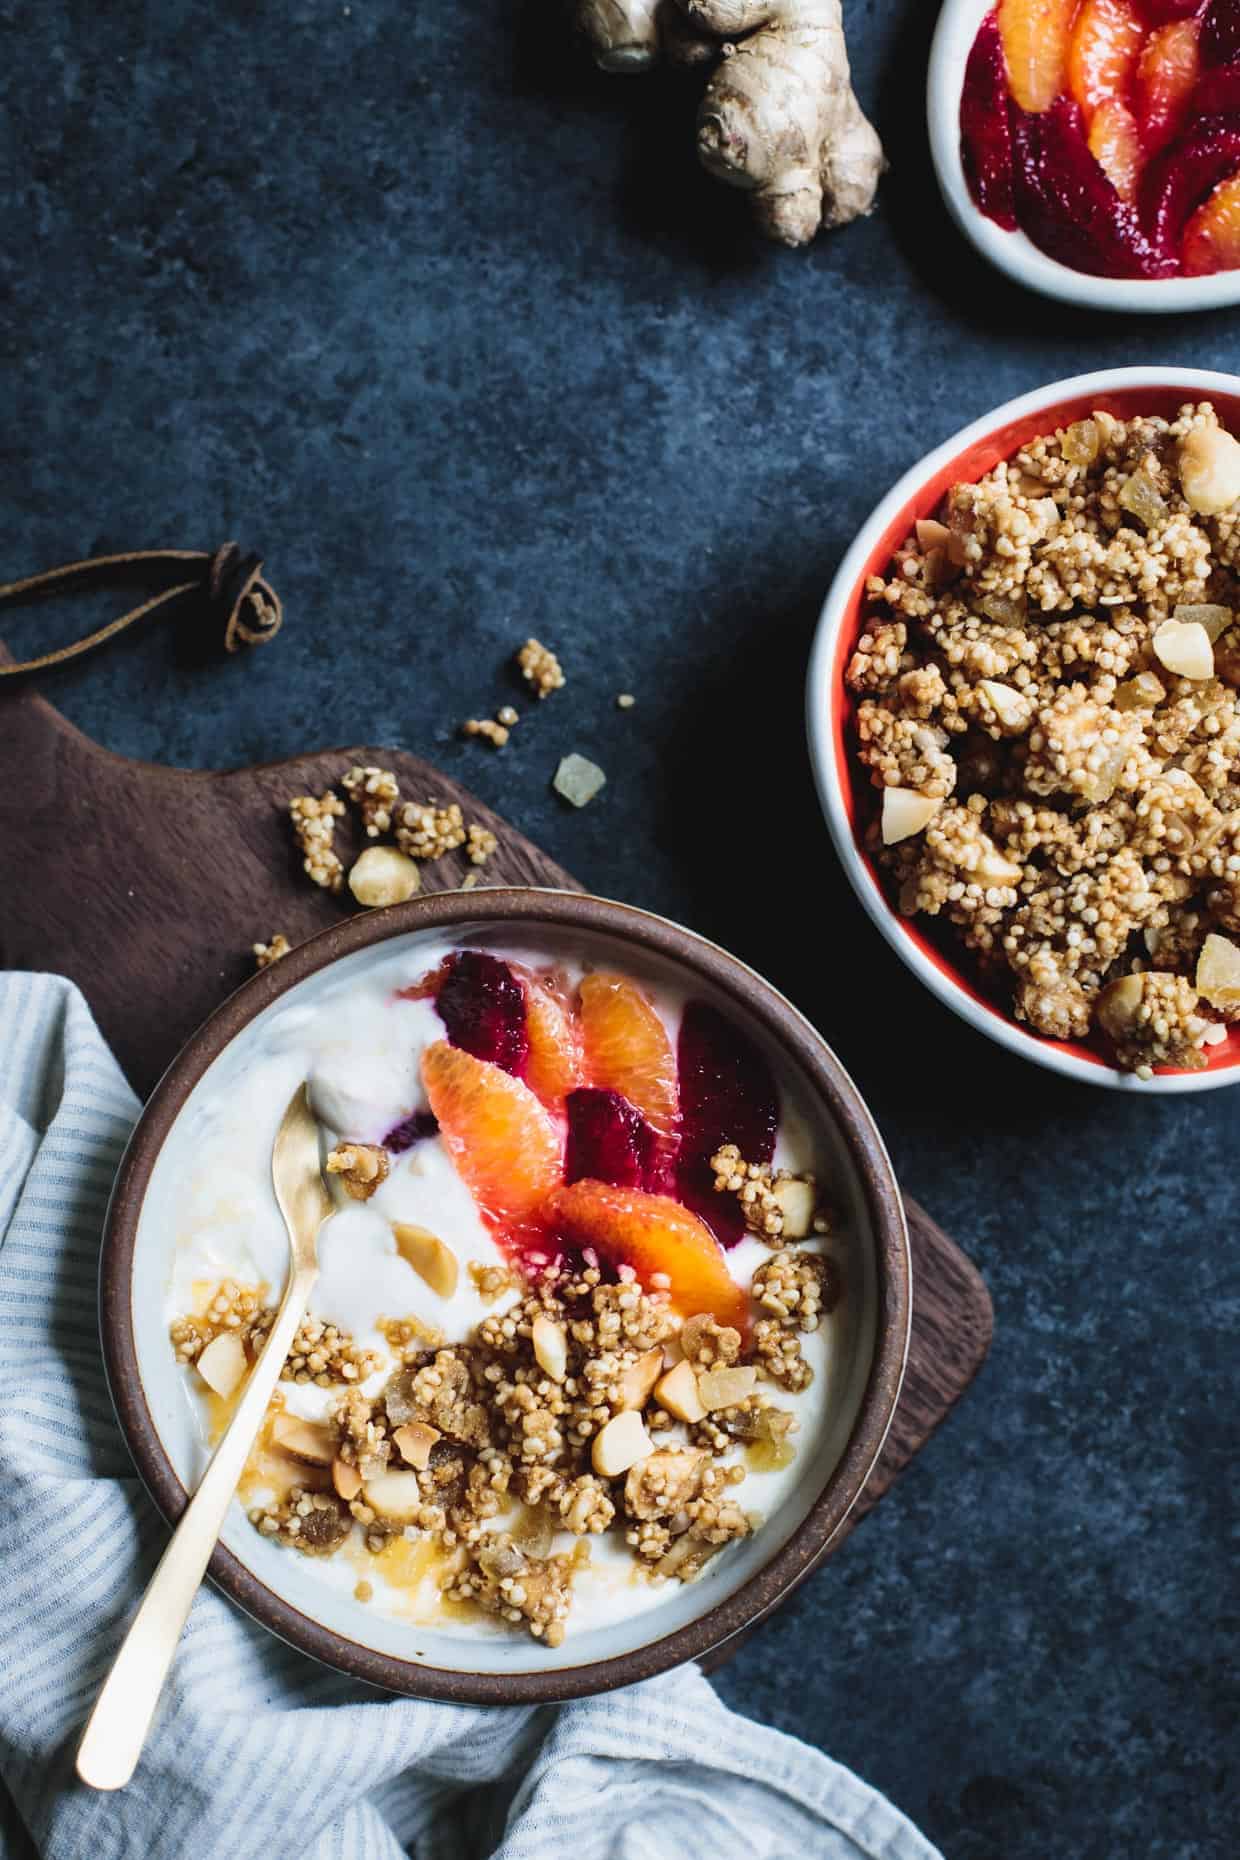 Puffed Quinoa Crumble with Macadamia and Candied Ginger Yogurt Topping